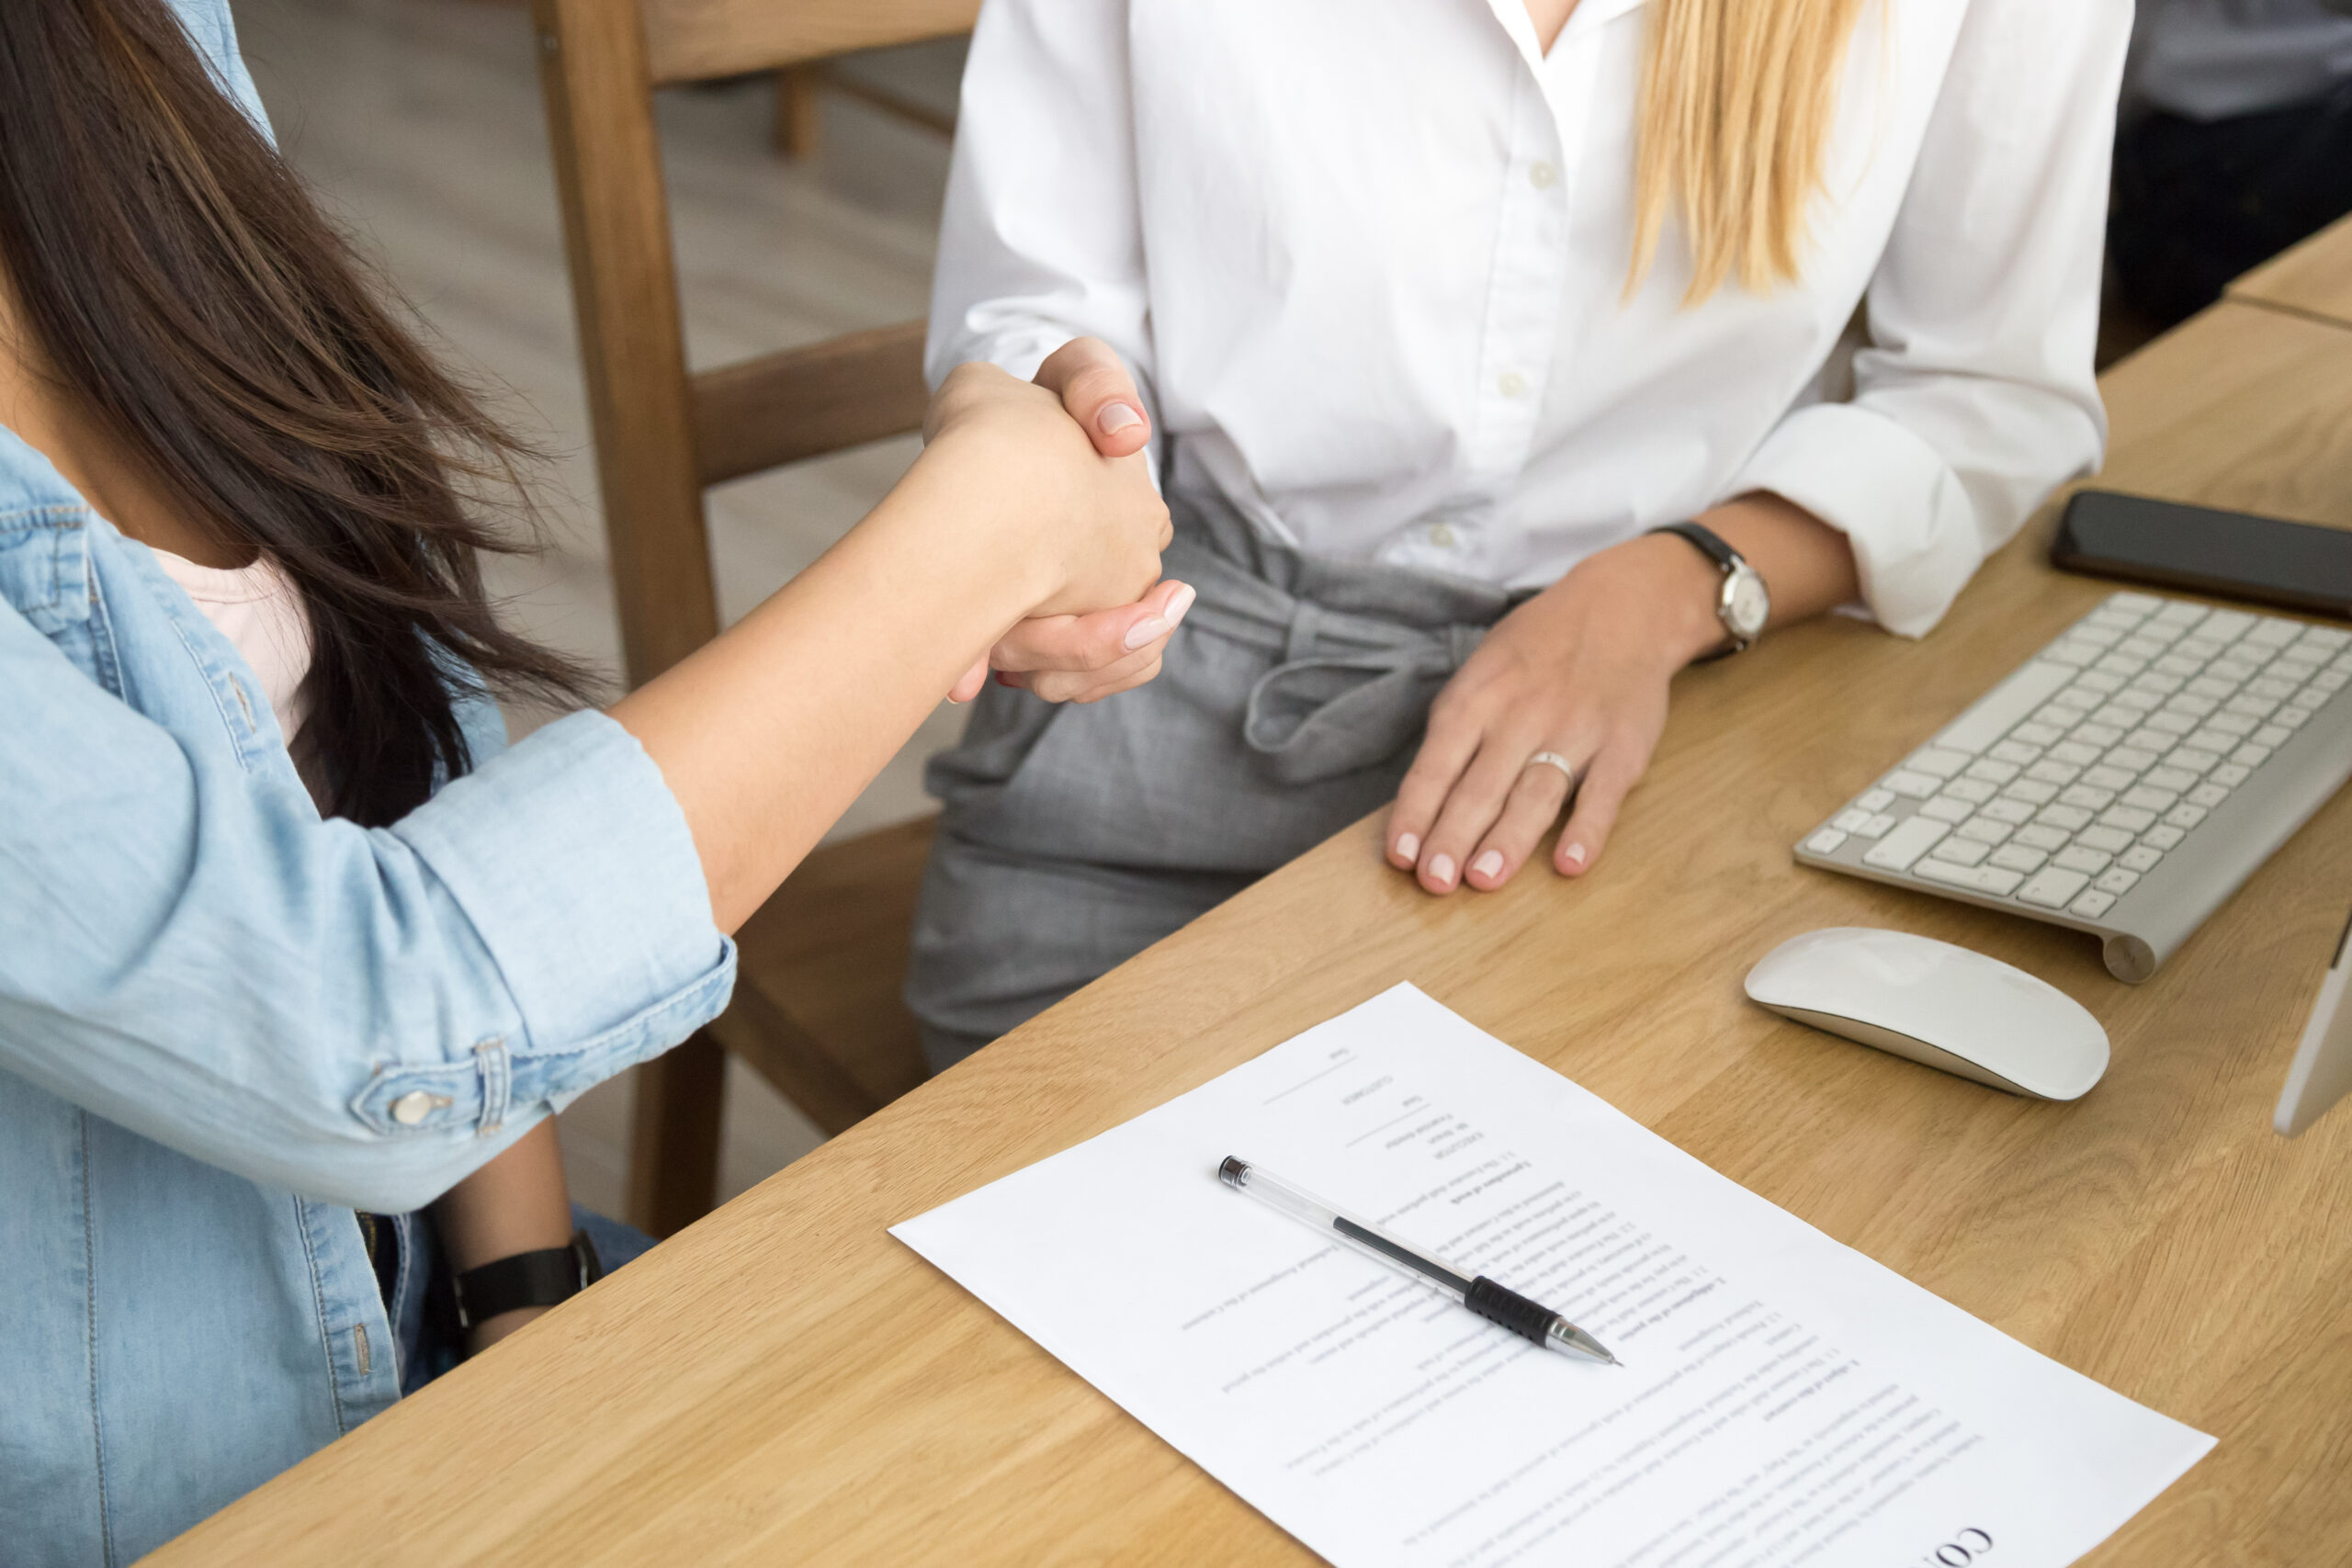 Two women partners handshaking after signing business contract a